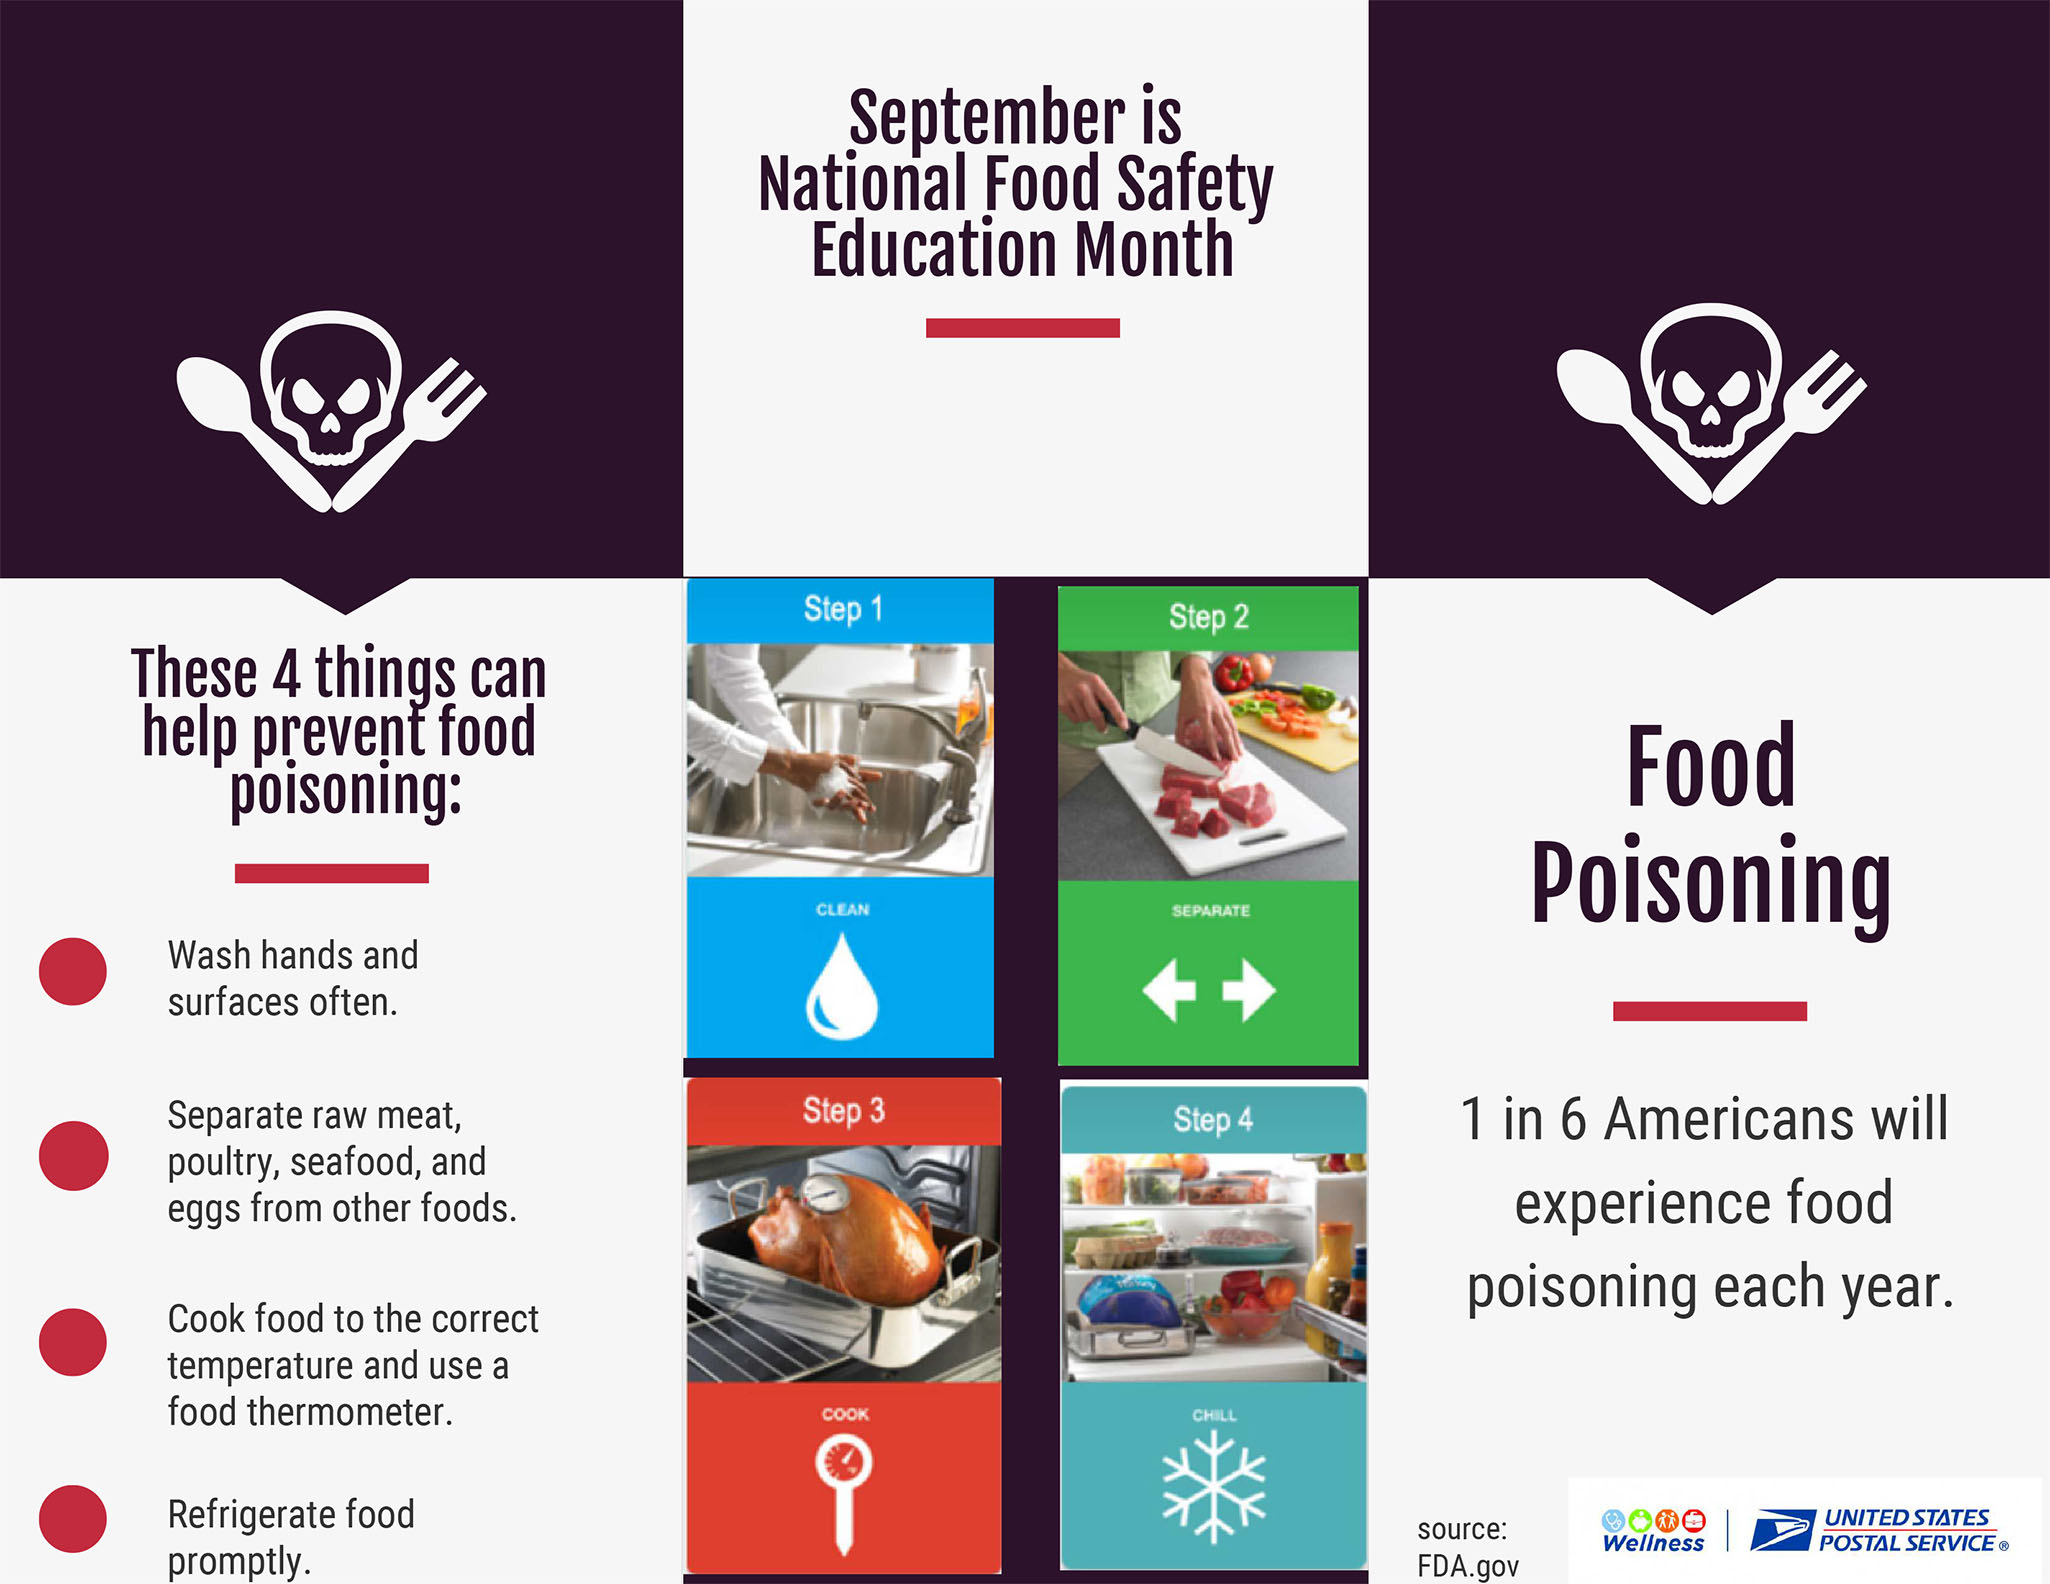 September is National Food Safety Education Month food poisoning: 1 in 6 Americans will experience food poisoning each year.These 4 things can help prevent food poisoning: Wash hands and surfaces often.Separate raw meat, poultry, seafood, and eggs from other foods.Cook food to the correct temperature and use a food thermometer.Refrigerate food promptly.